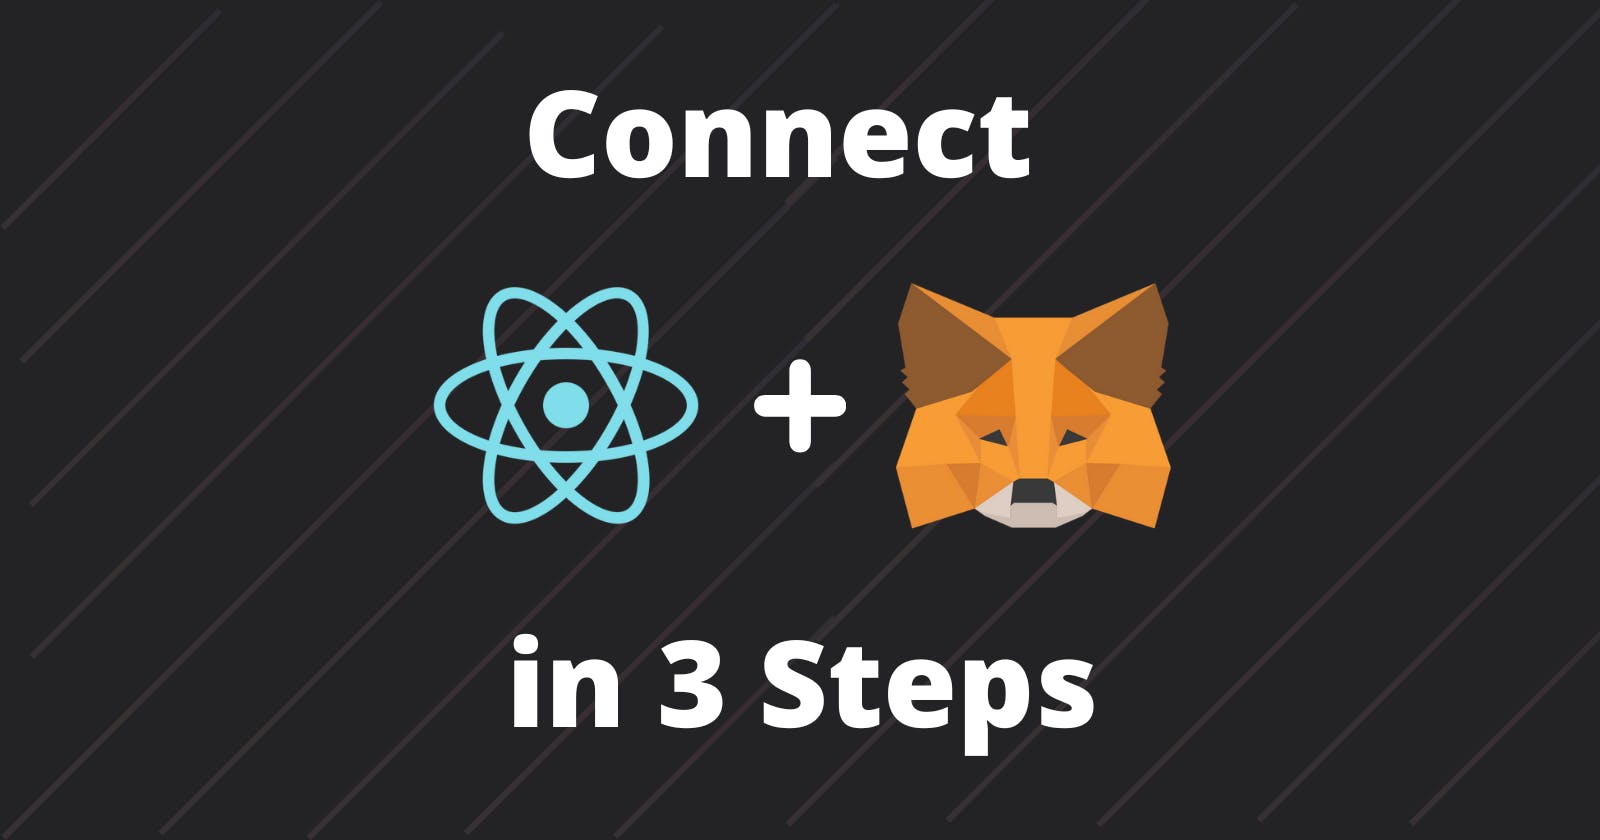 Connect ReactJs with MetaMask Wallet in 3 Steps.